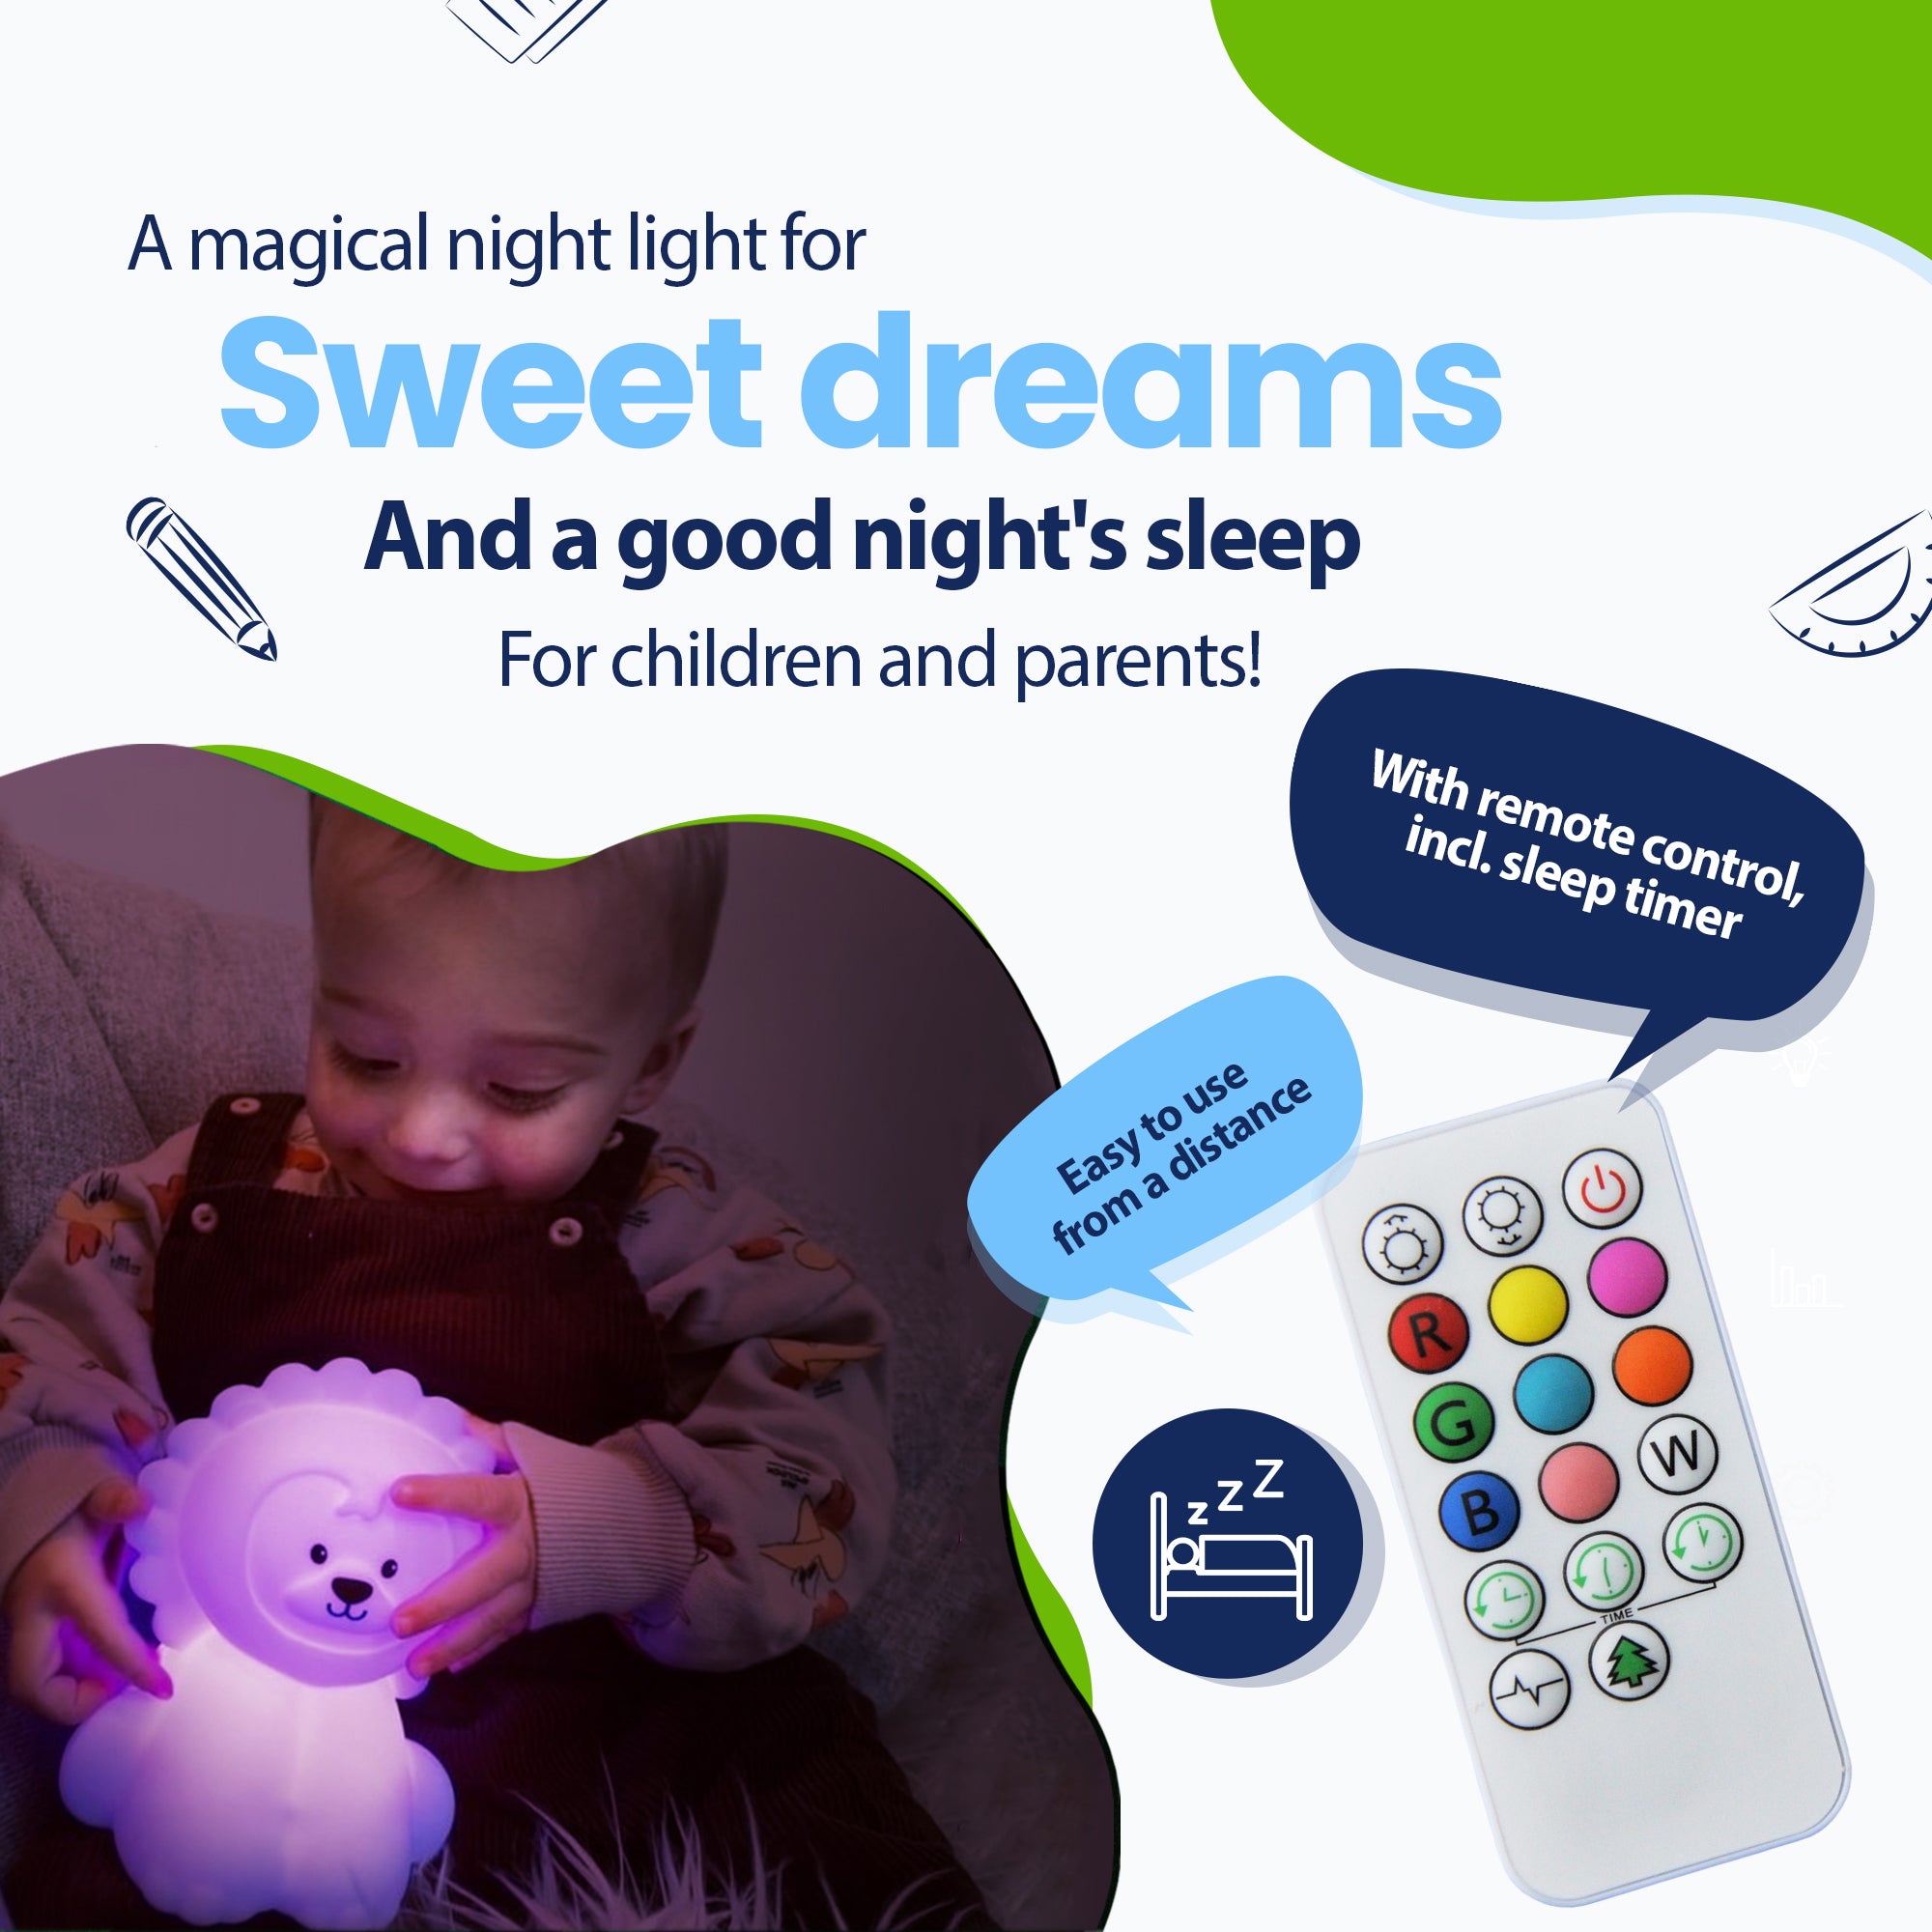 A magical night light for pleasant dreams and a healthy night's sleep for children and parents - with remote control including sleep timer - easily from a distance